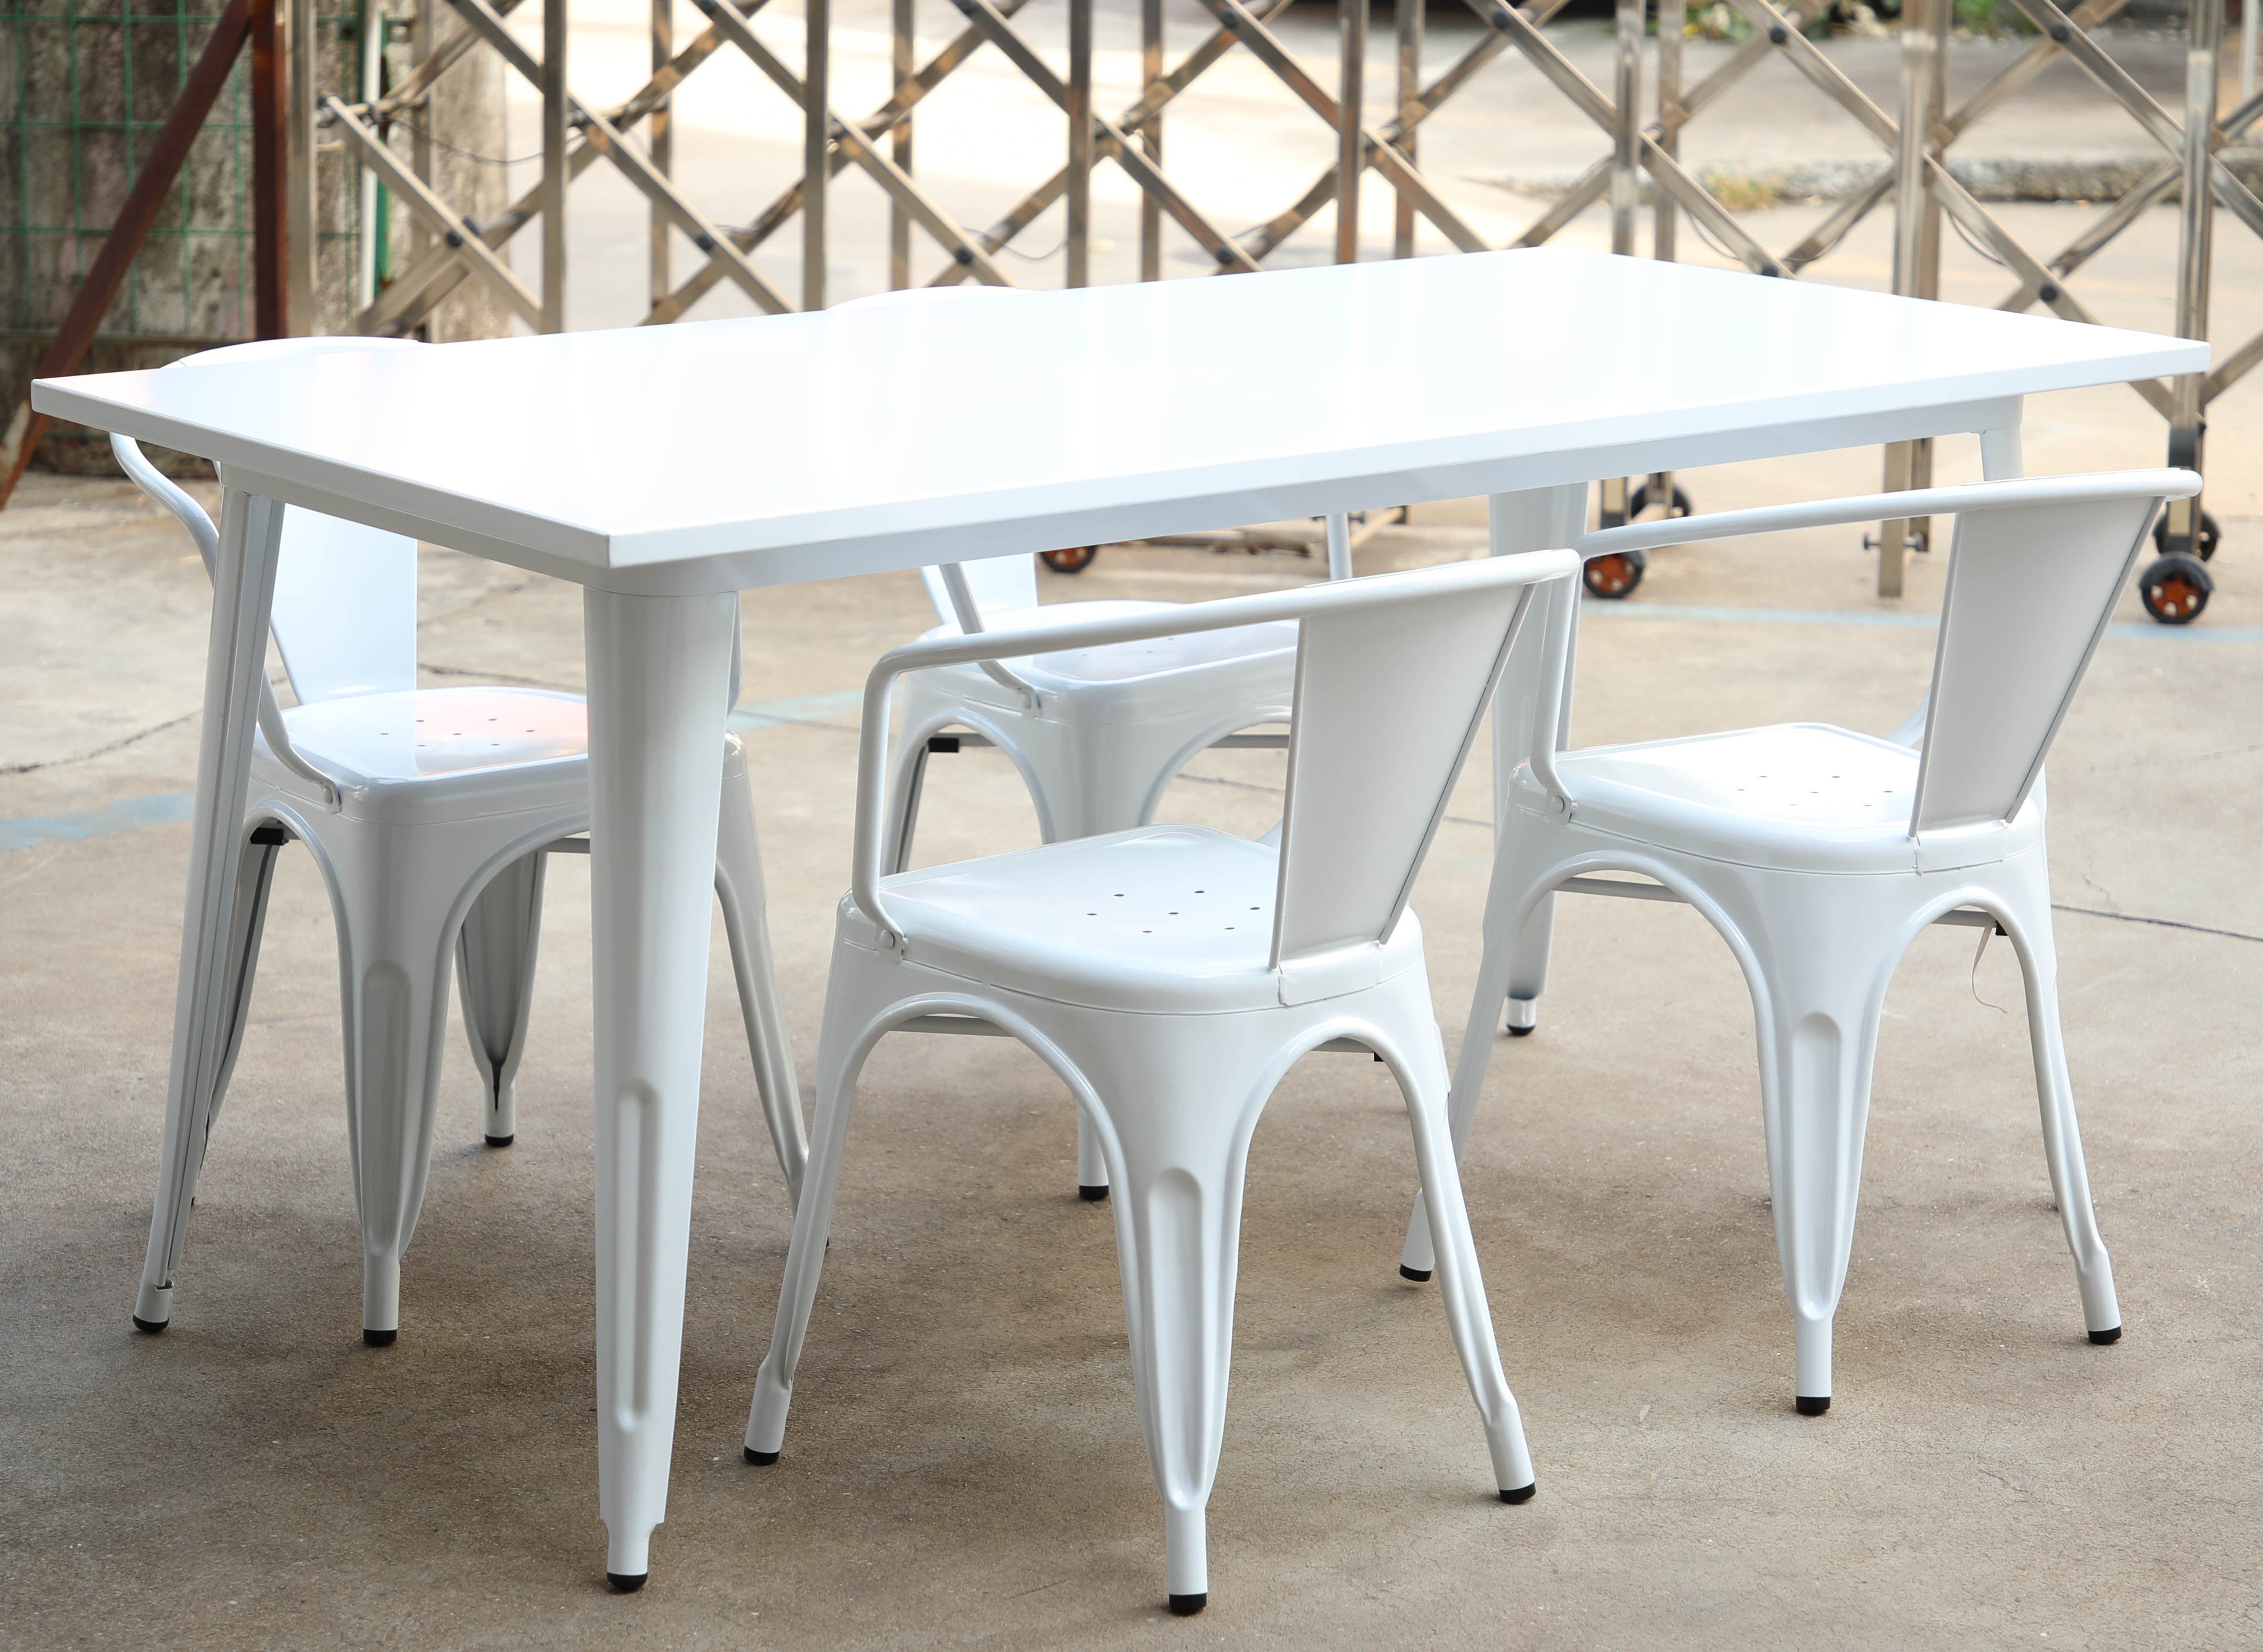 https://www.goldapplefurniture.com/metal-steel-dining-table-for-outdoor-use-ga101t-product/